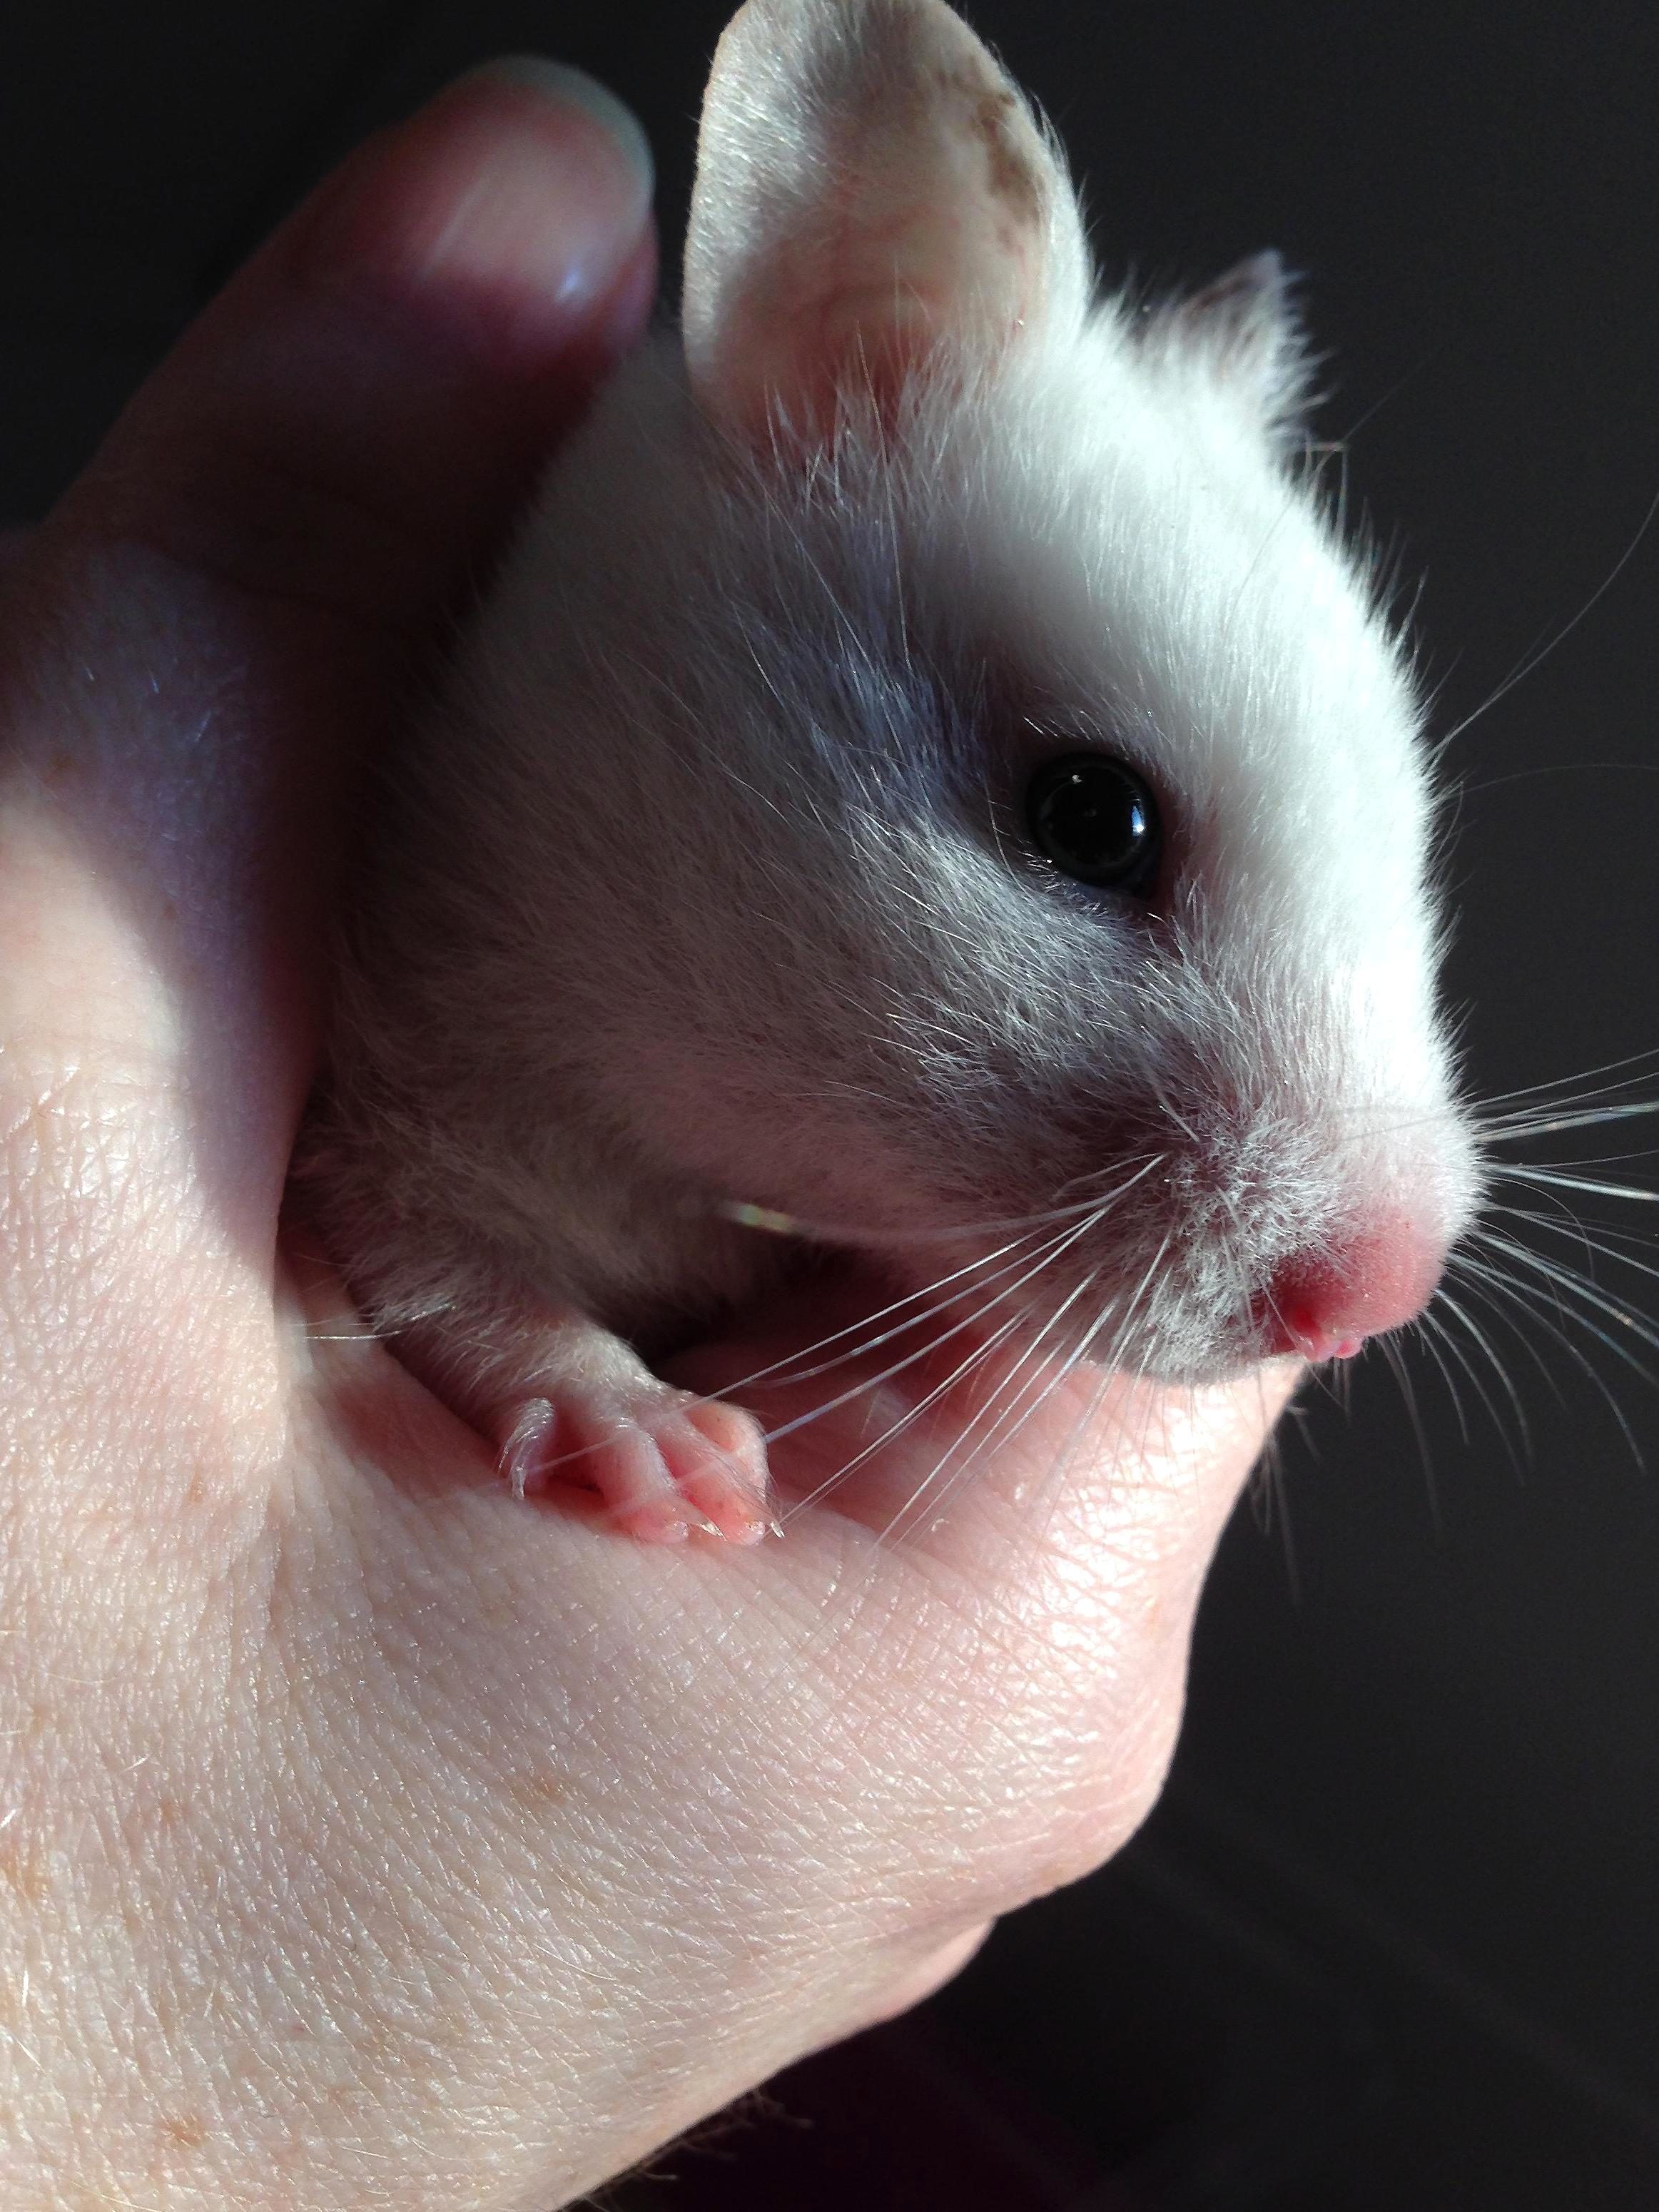 Free picture: animal, white mouse, wildlife, fauna, hamster, hand